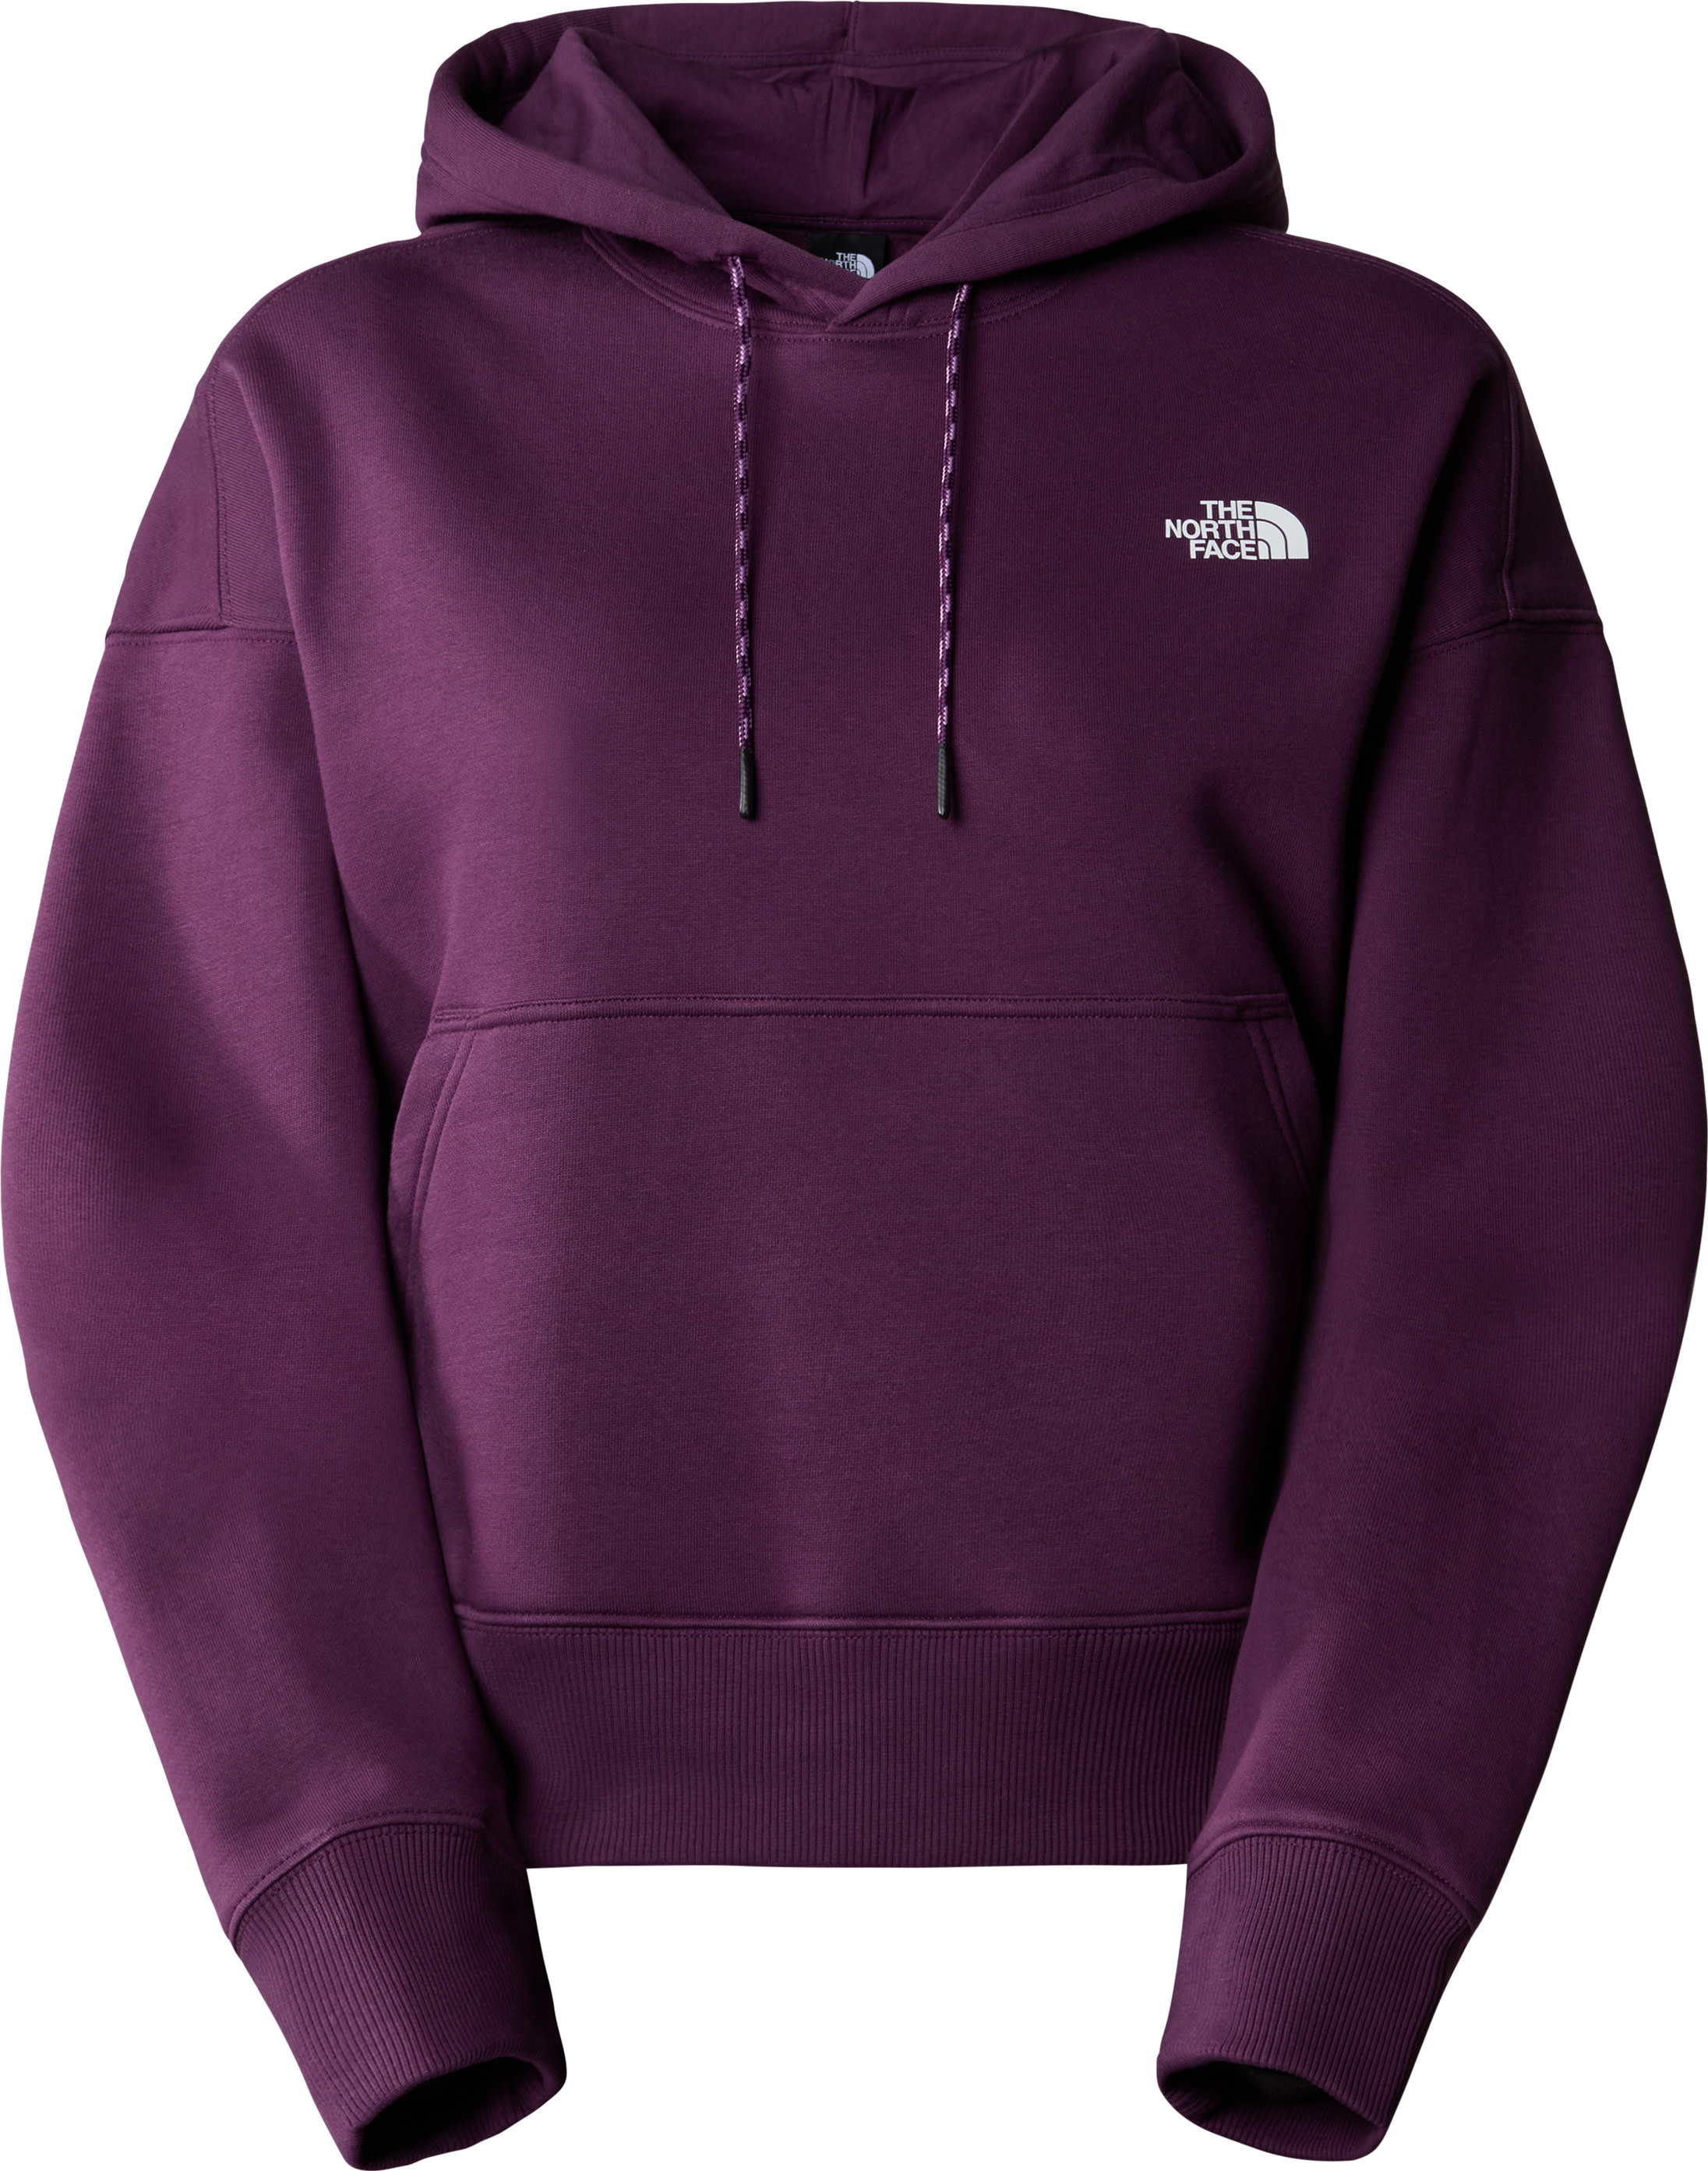 The North Face The North Face Women's Outdoor Graphic Hoodie Black Currant Purple M, Black Currant Purple